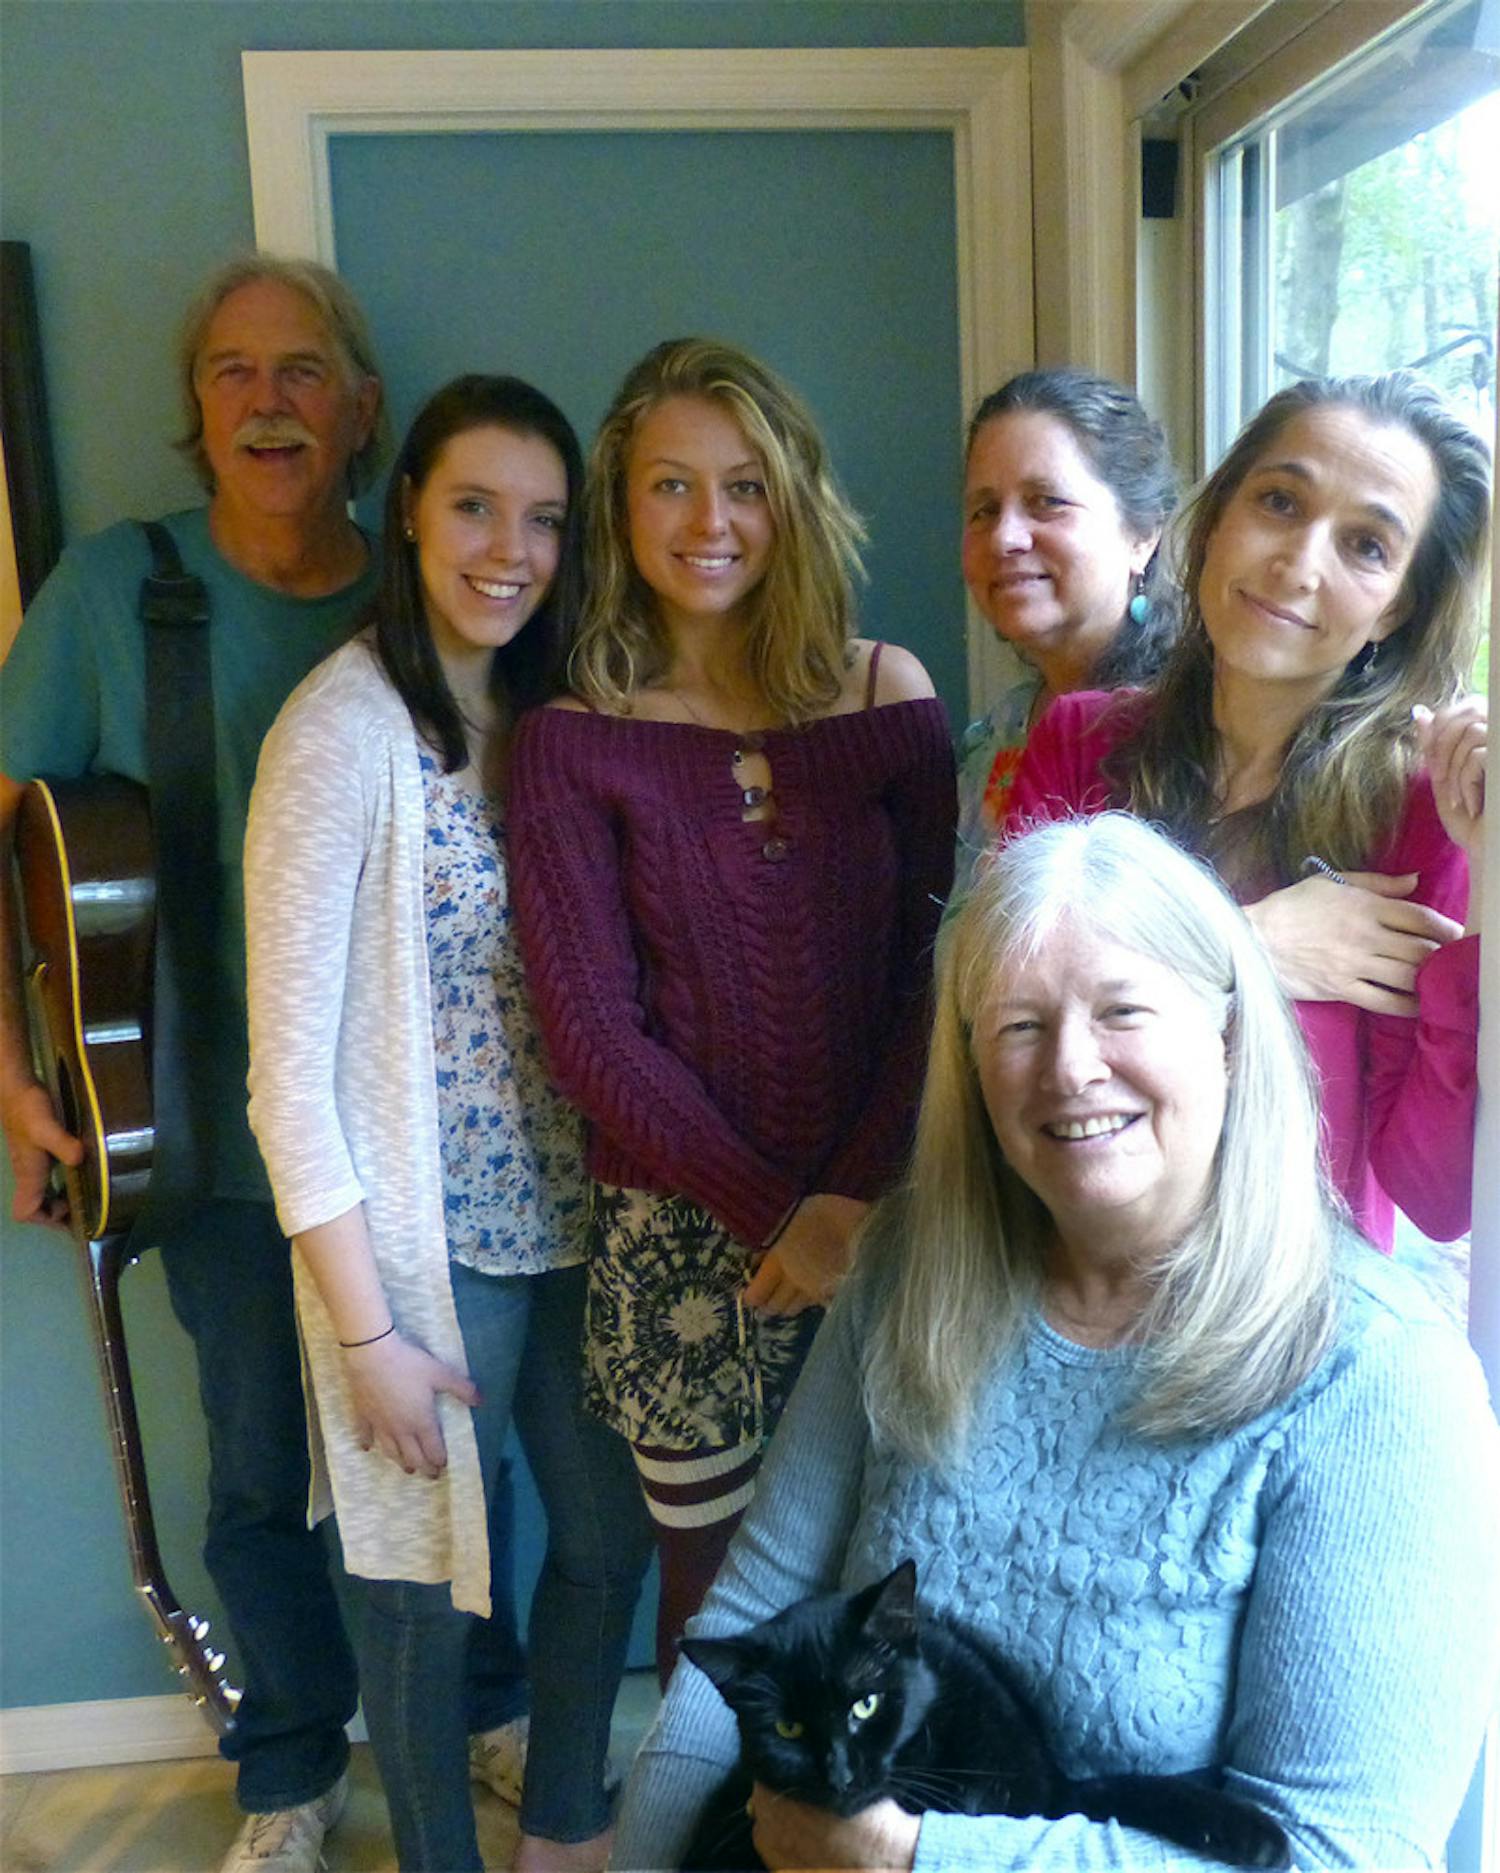 From left: Local musicians Mike Boulware, Carolina Boulware, Maggie Rucker, Janet Rucker, Heather Hall and Cathy DeWitt (front) and others will be performing all of the songs from King’s album “Tapestry” at 7:30 p.m. in the Historic Thomas Center on Jan. 30, 2016.